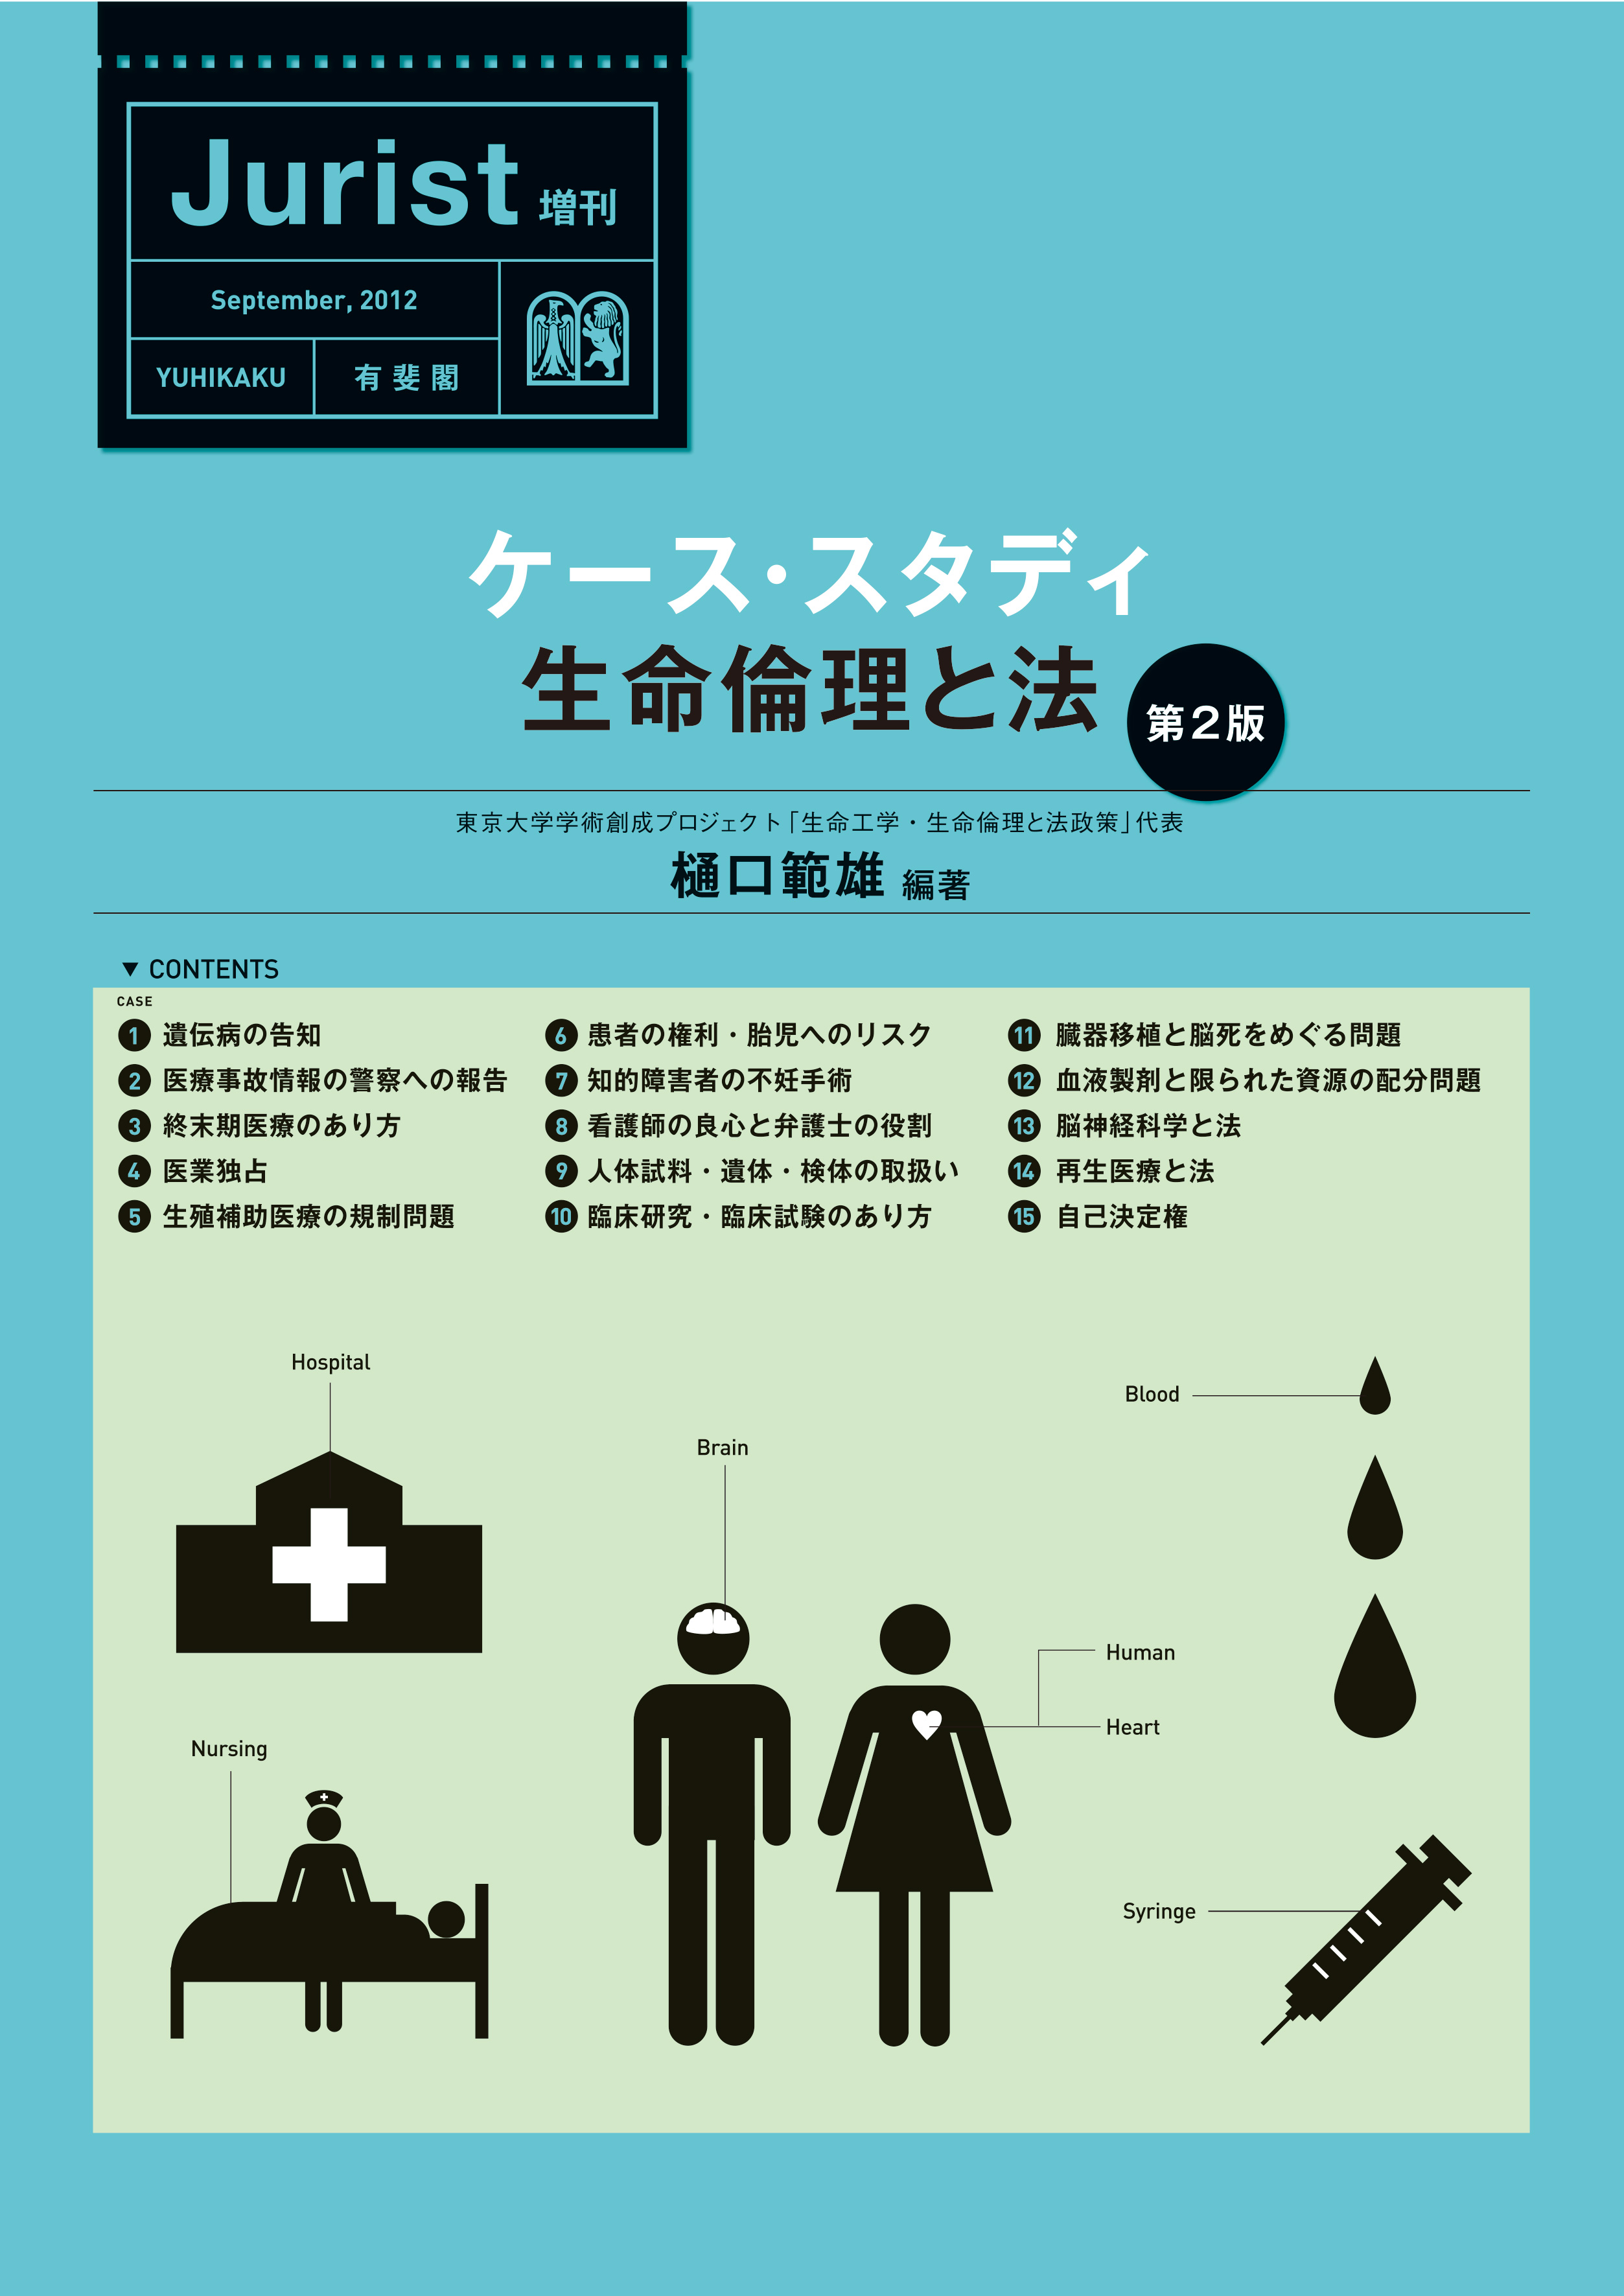 Medicine-related pictogram and TOC against pale blue background of the cover